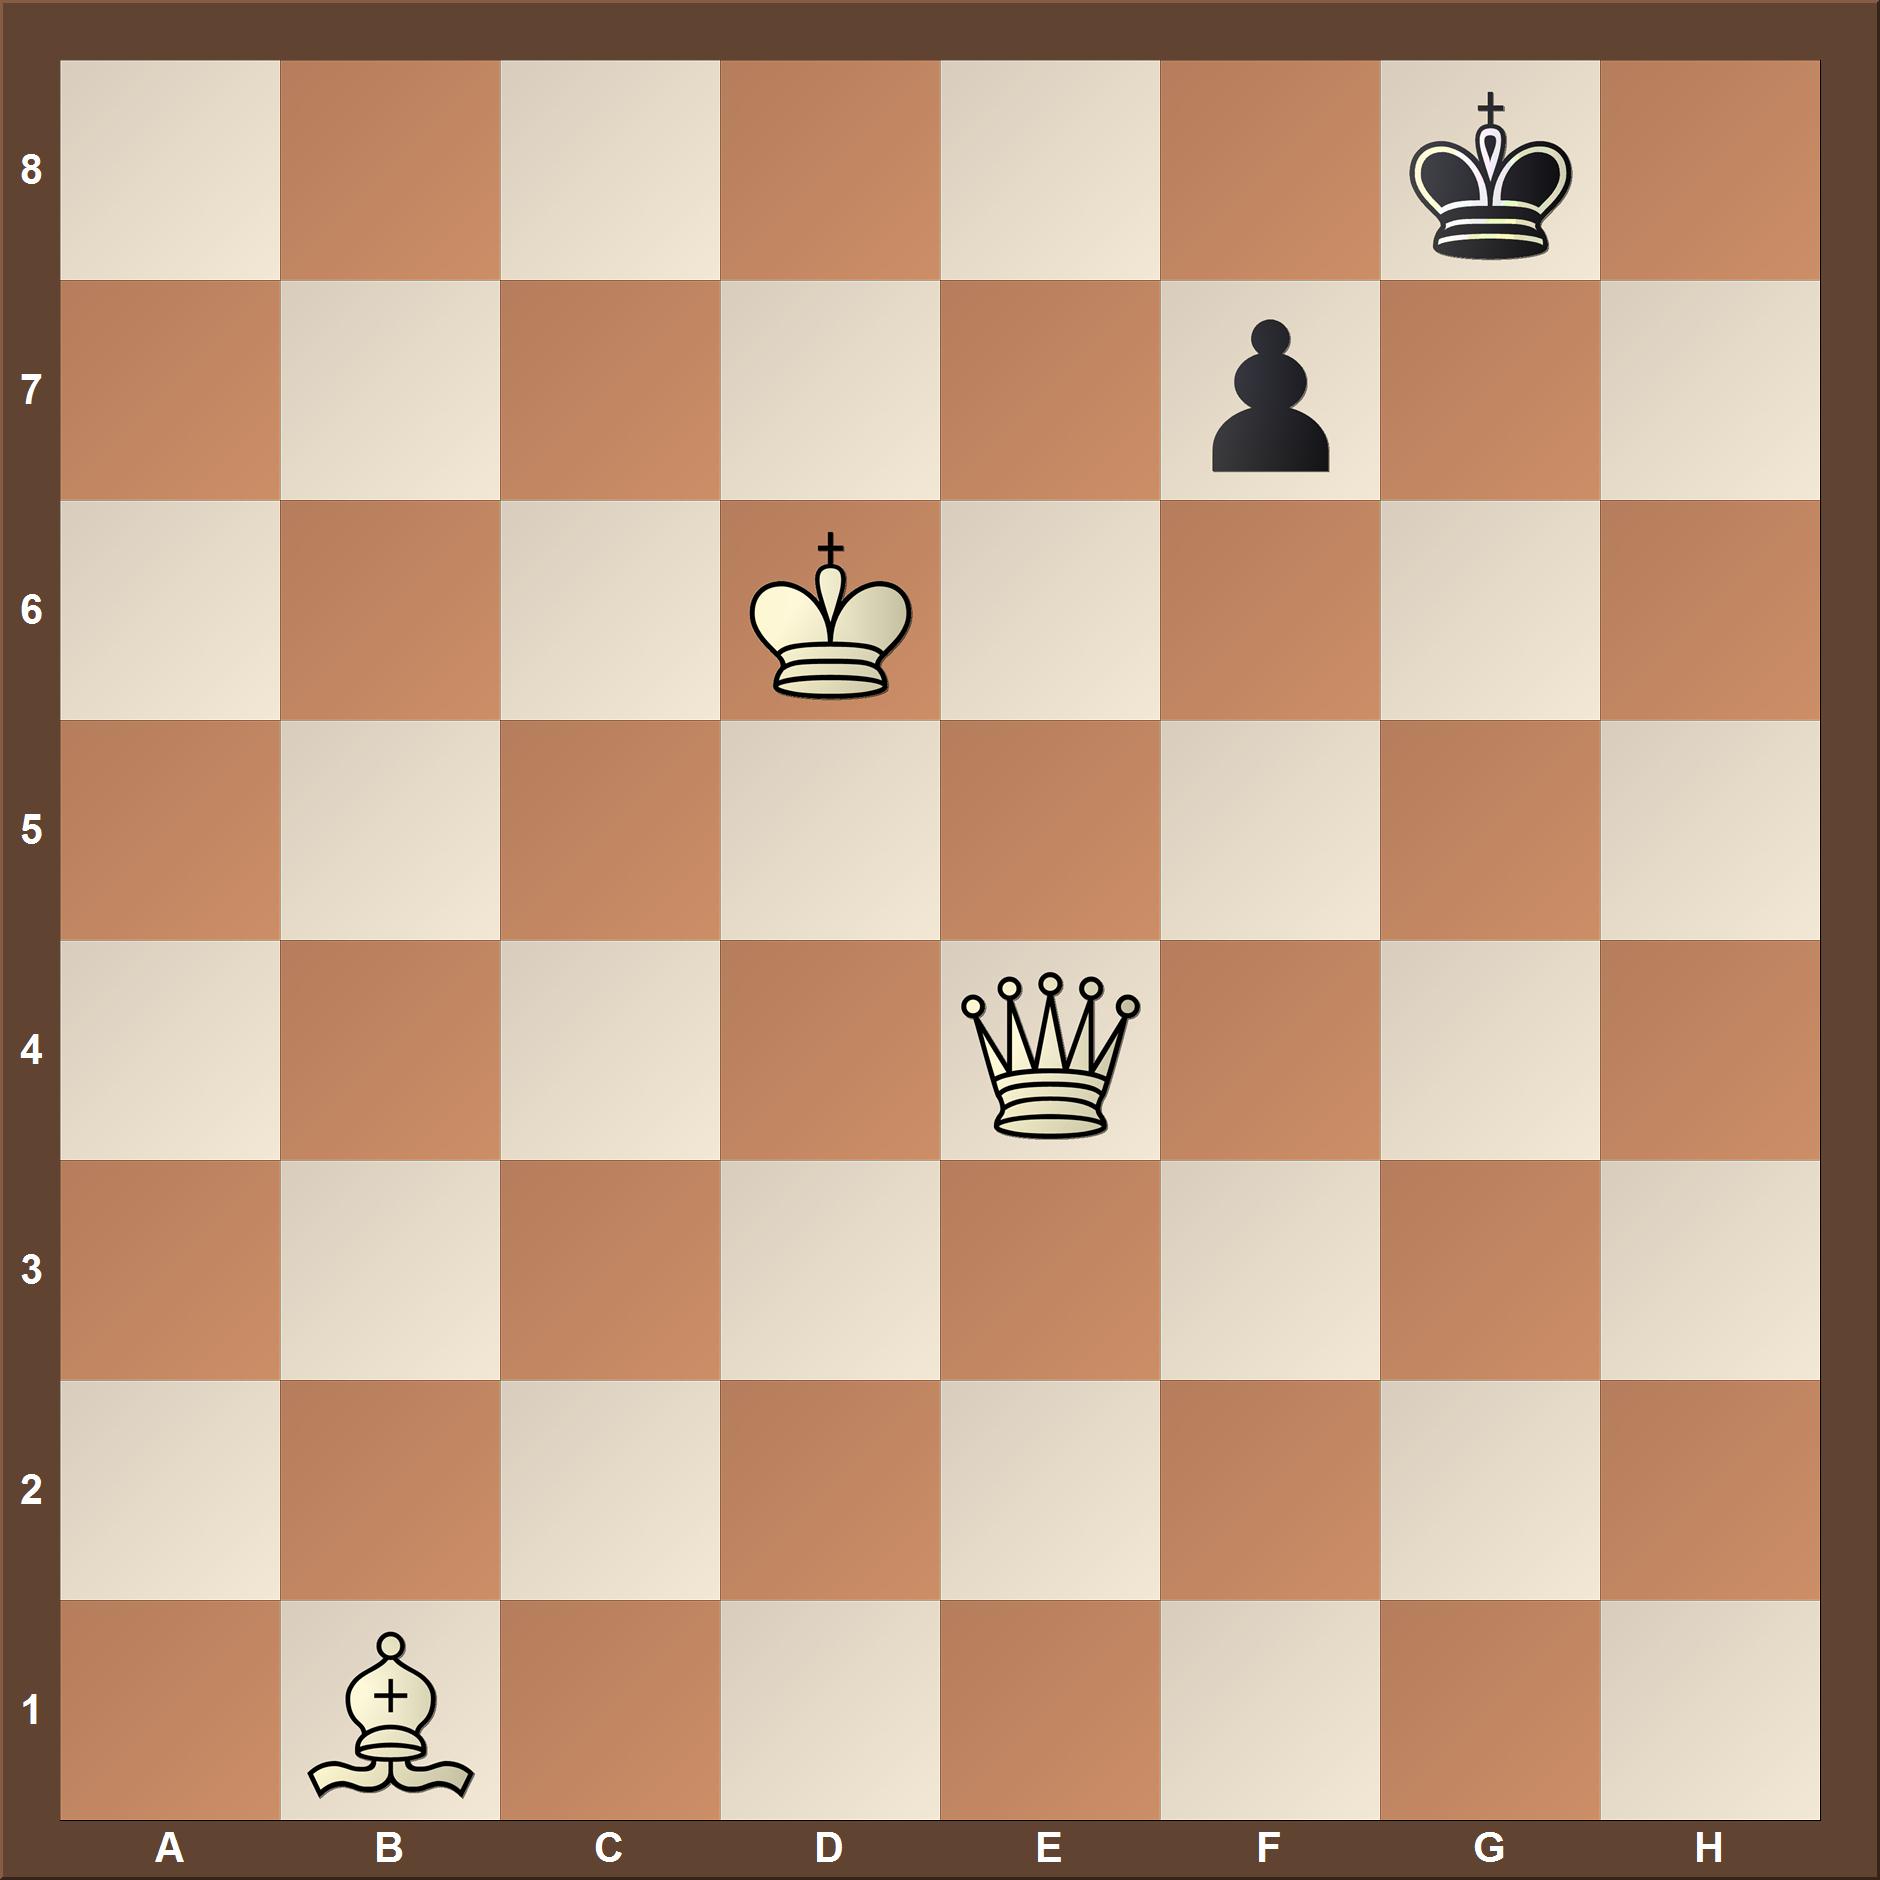 Checkmate in two move - No 3